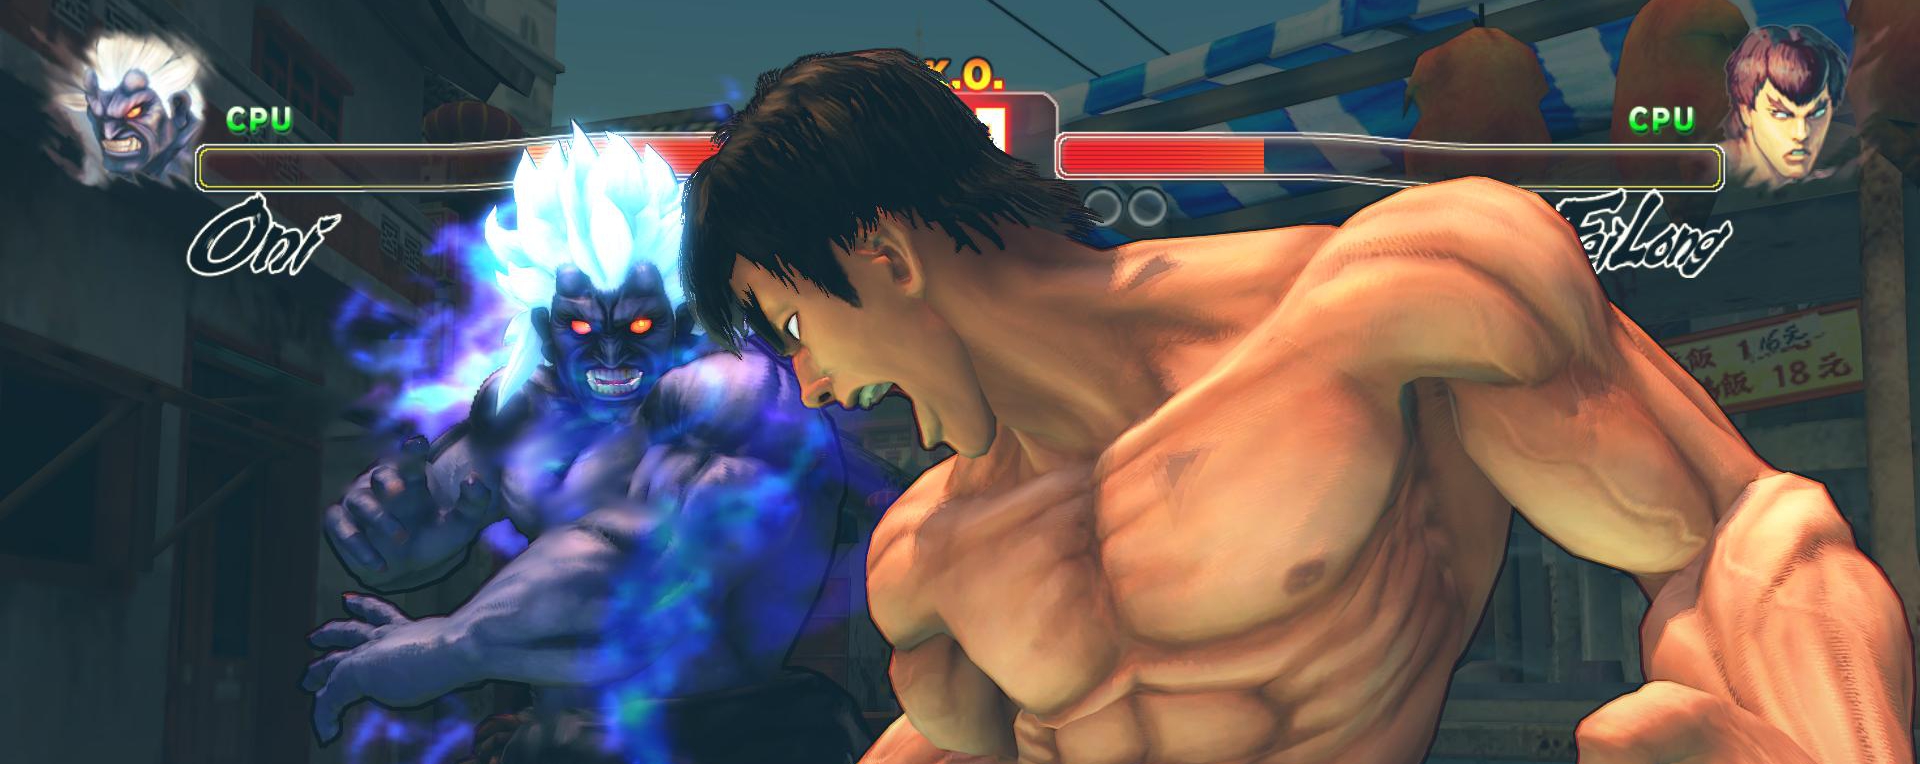 Super Street Fighter IV: Arcade Edition - TFG Review